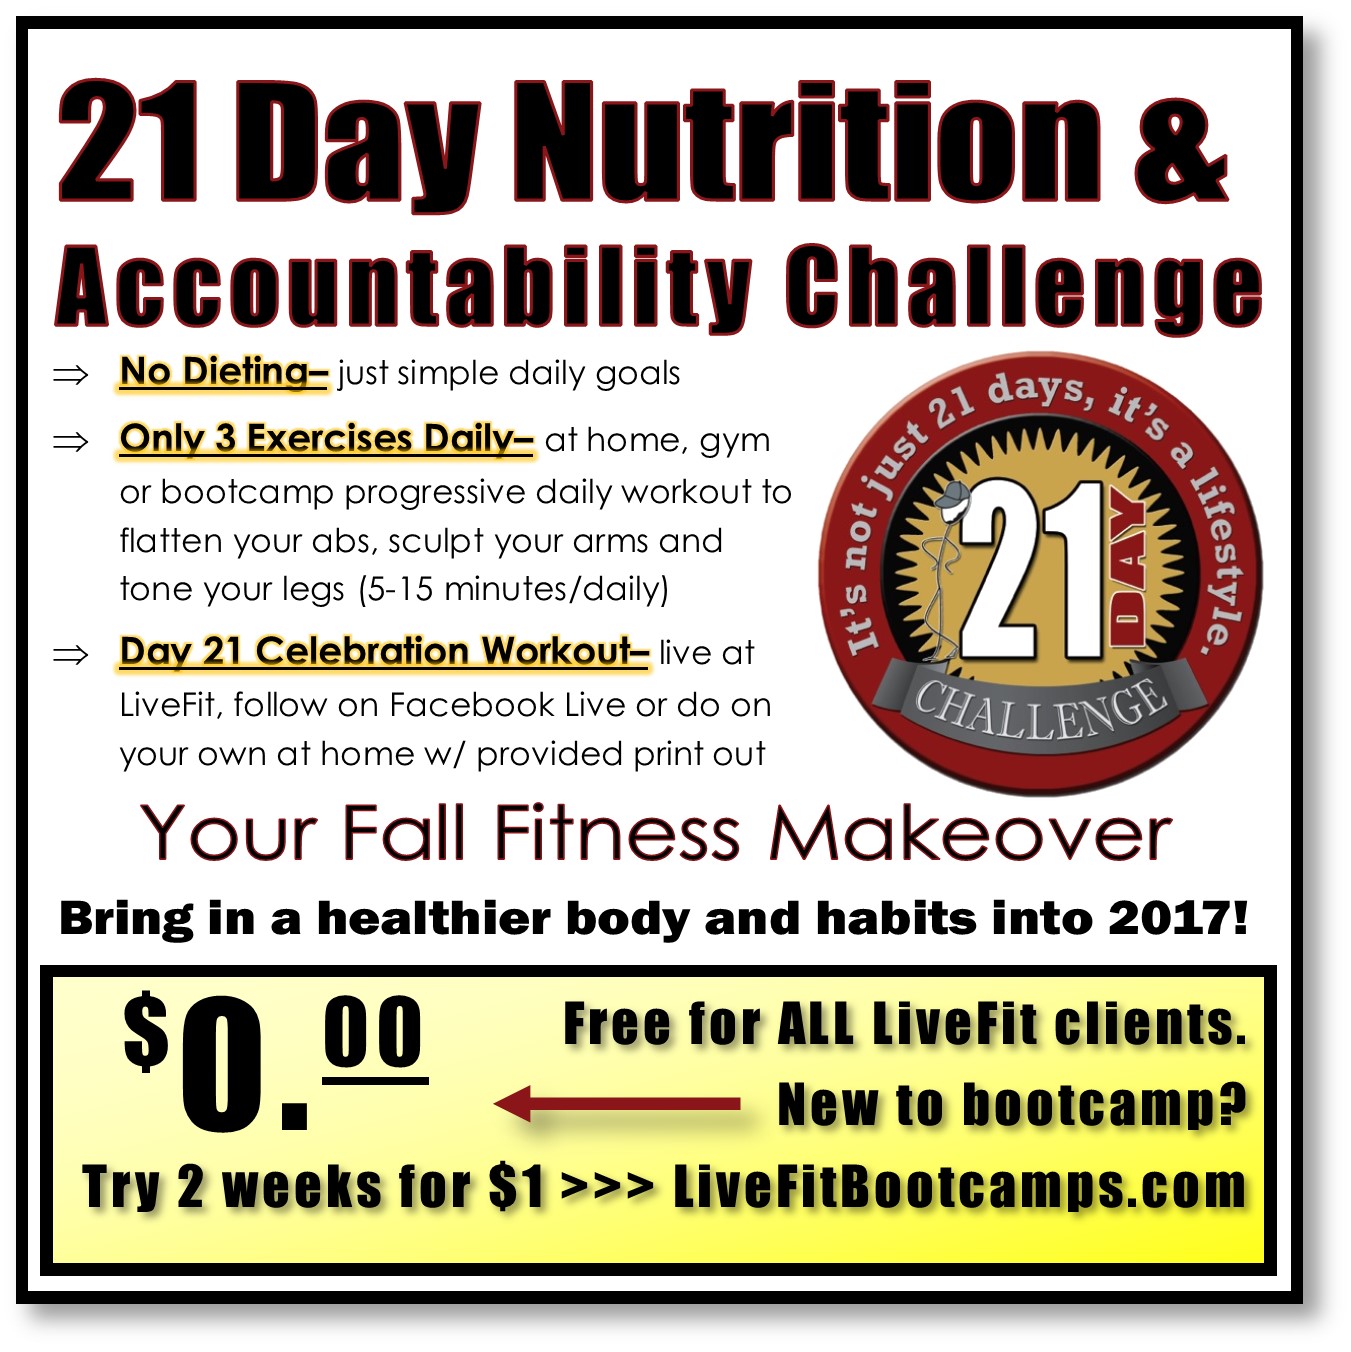 I think this will help you (Nutrition & Accountability challenge)